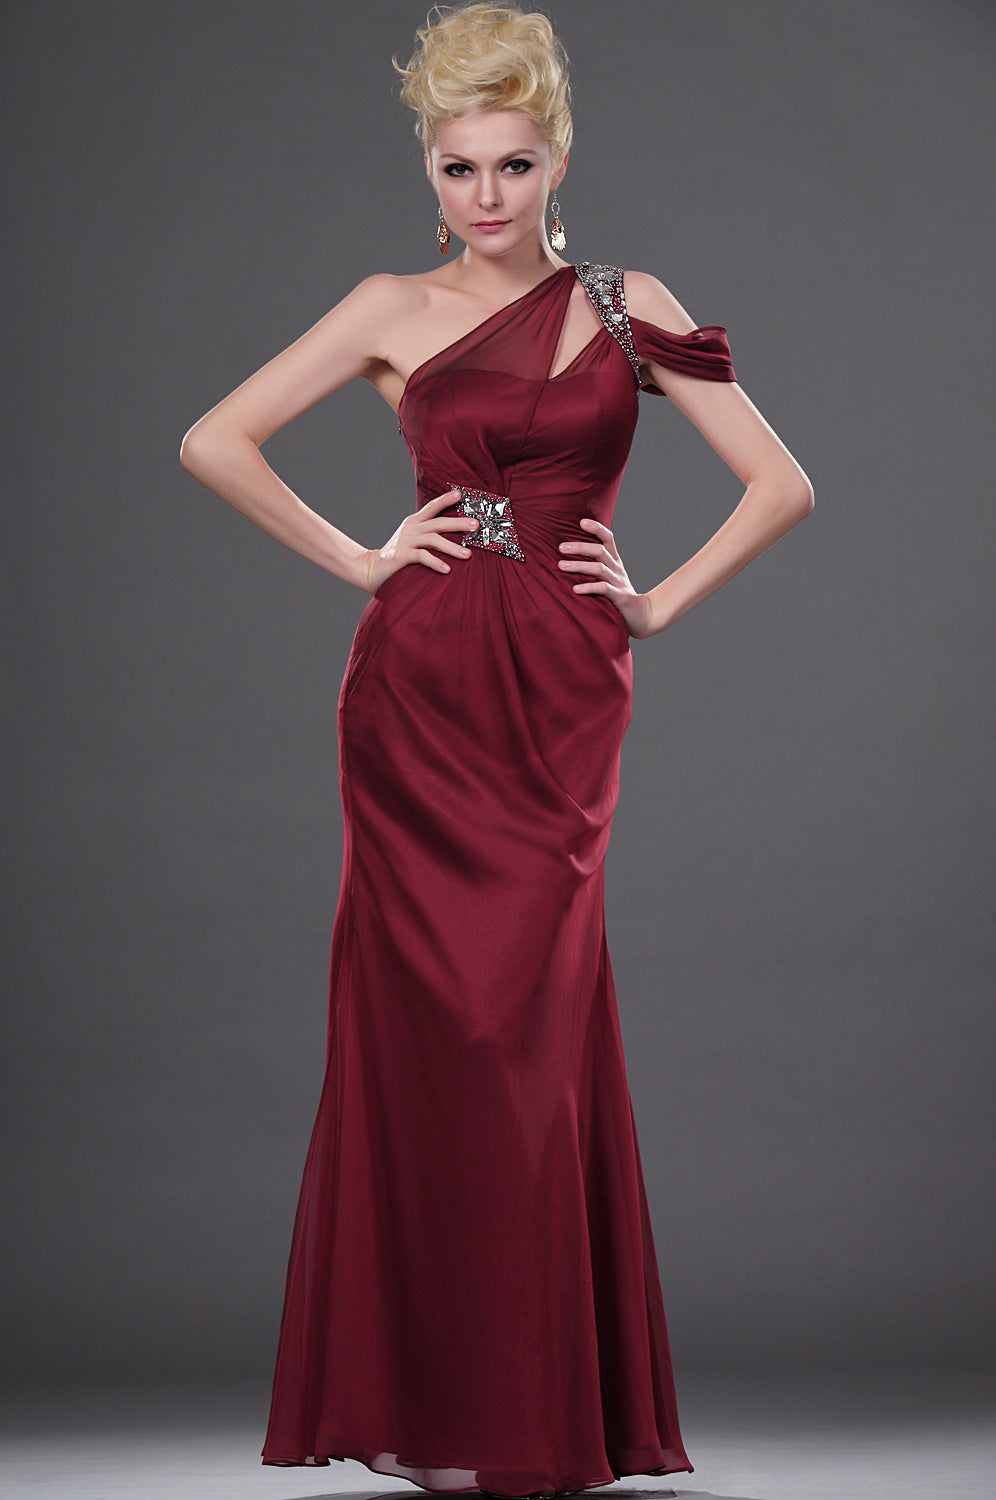 Burgundy Sheath/Column One Shoulder Mother Gowns With Beading Bridesmaid Dress(UKBD03-449)